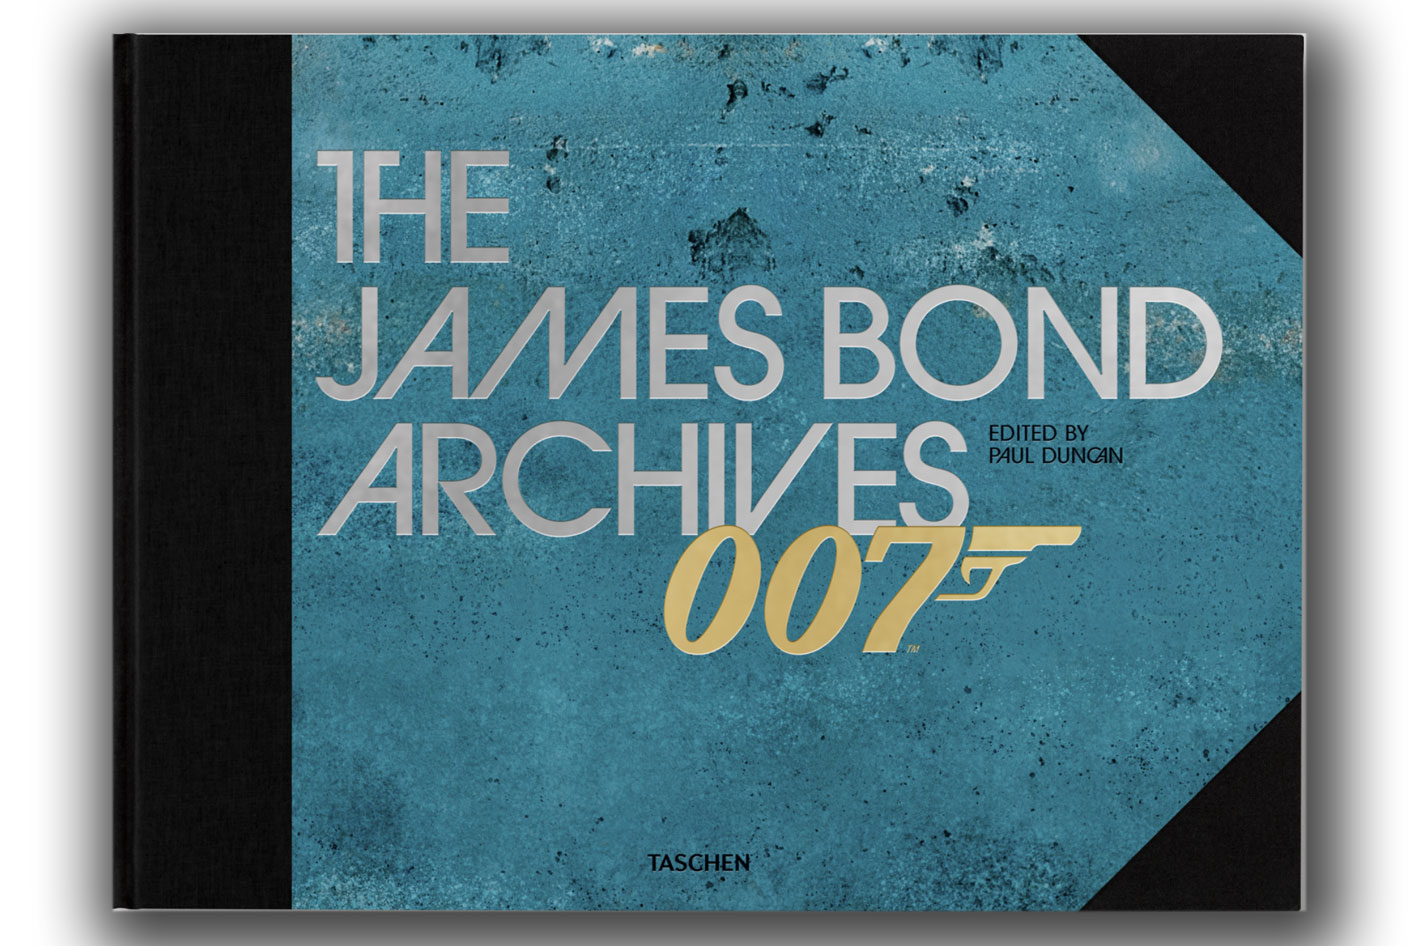 Everything you want to know about the making of James Bond series